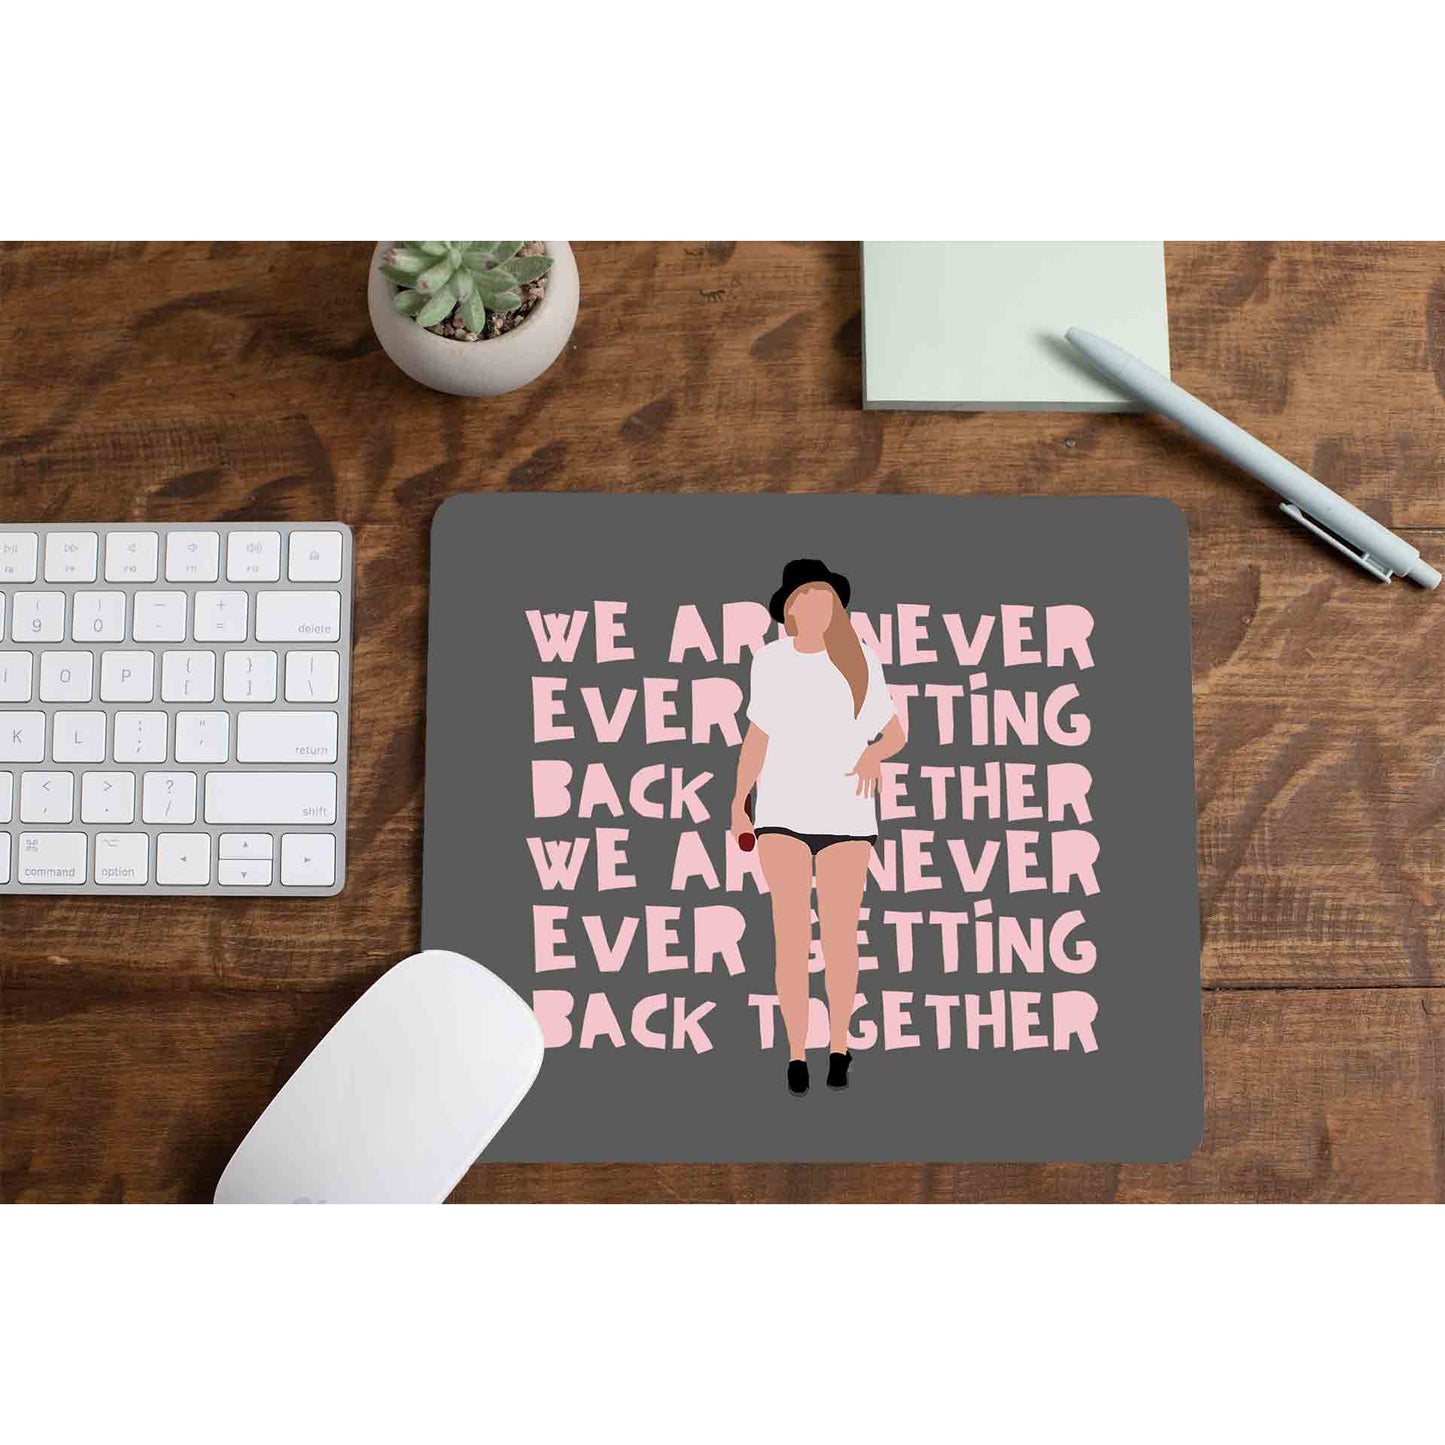 taylor swift getting back together mousepad logitech large music band buy online united states of america usa the banyan tee tbt men women girls boys unisex  